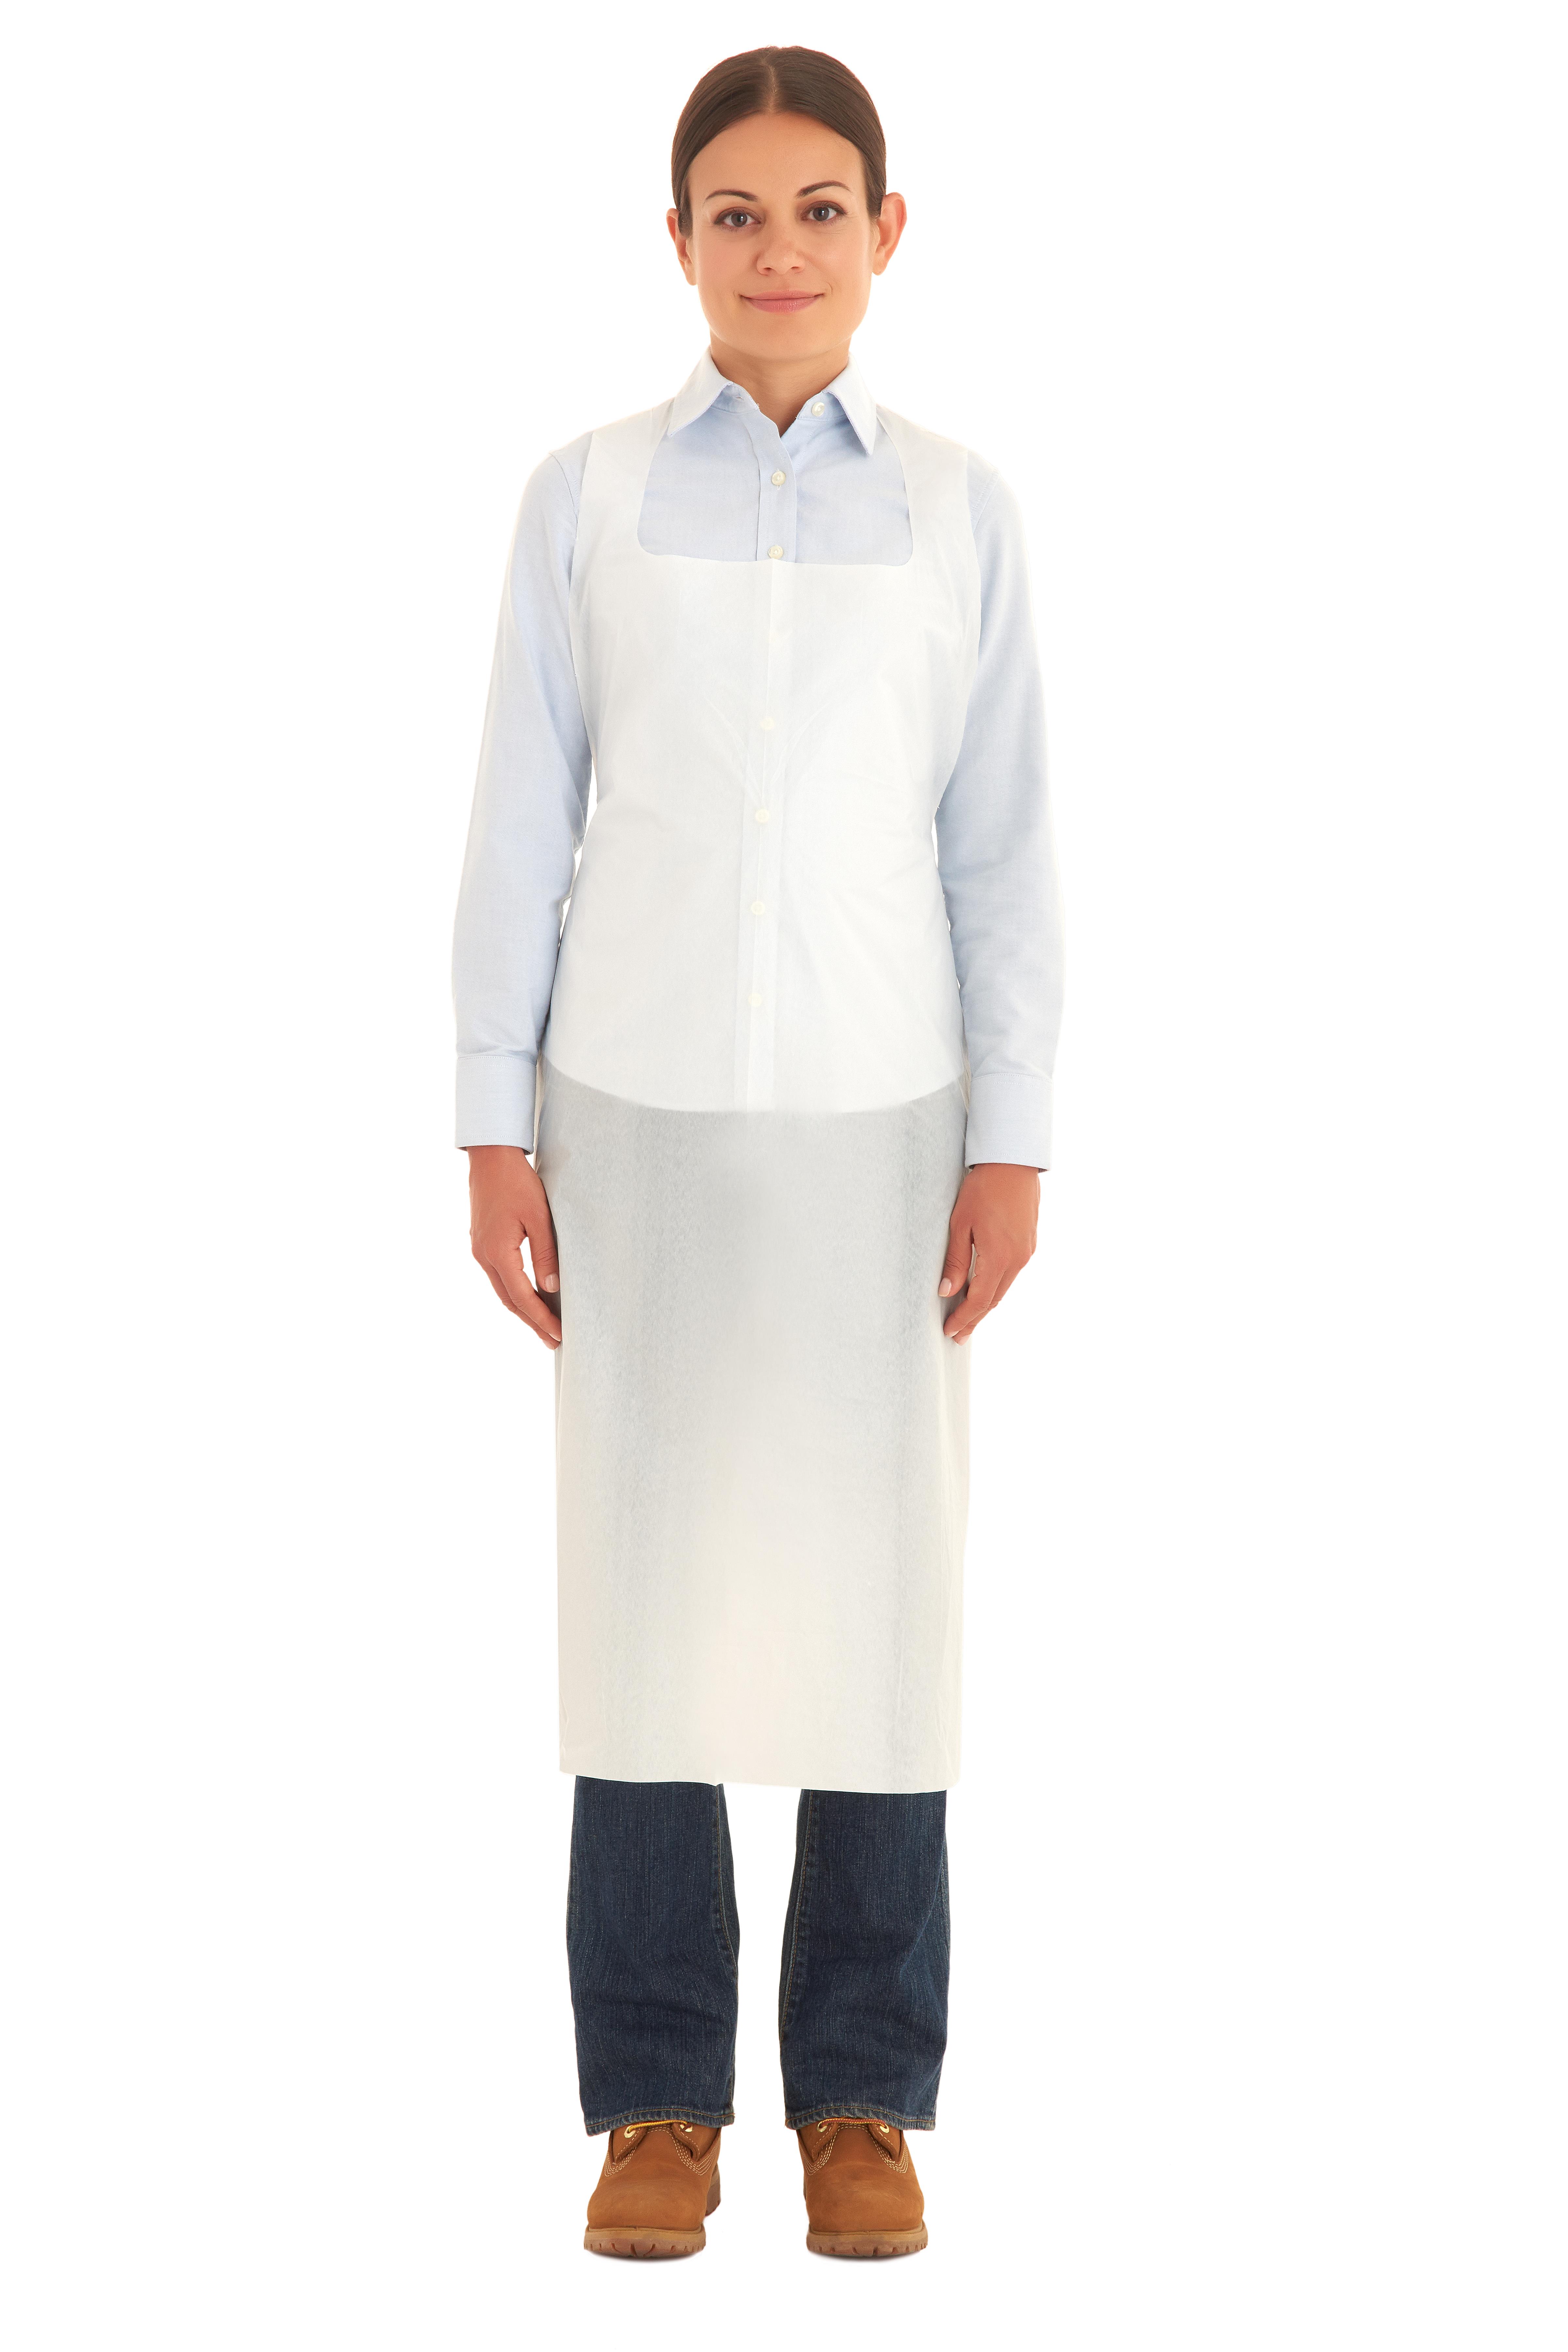 1.5 MIL WHITE SMOOTH POLY APRON 28 X 46 - Tagged Gloves